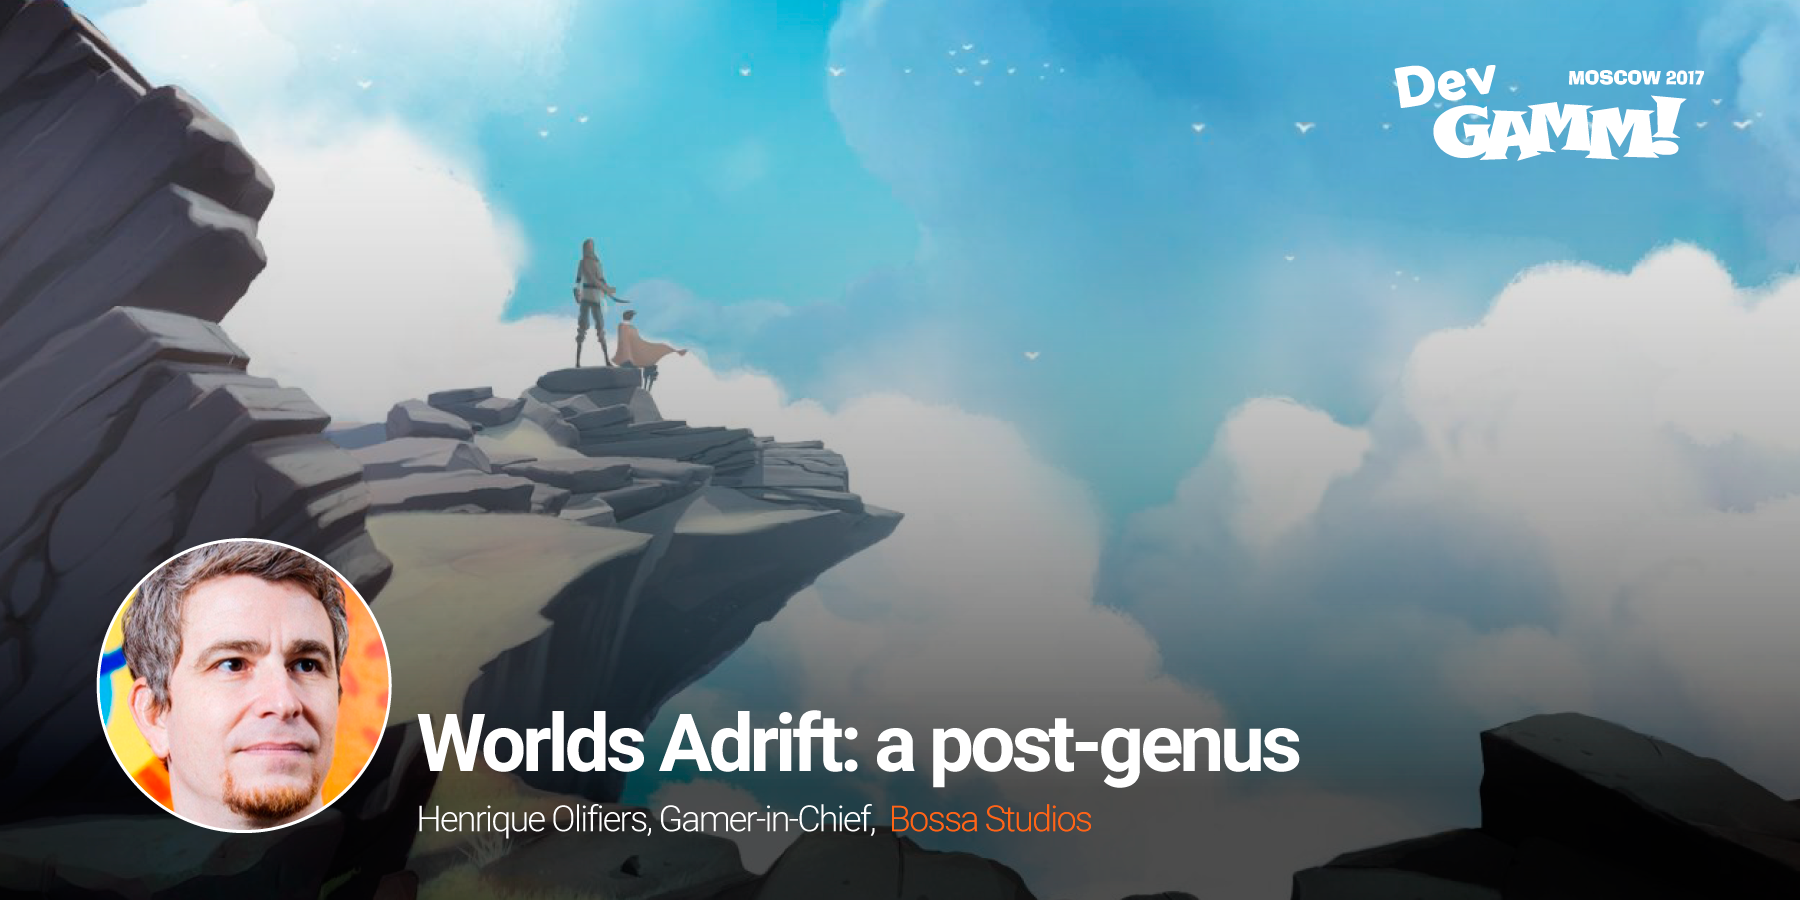 You are currently viewing Worlds Adrift: a post-genus